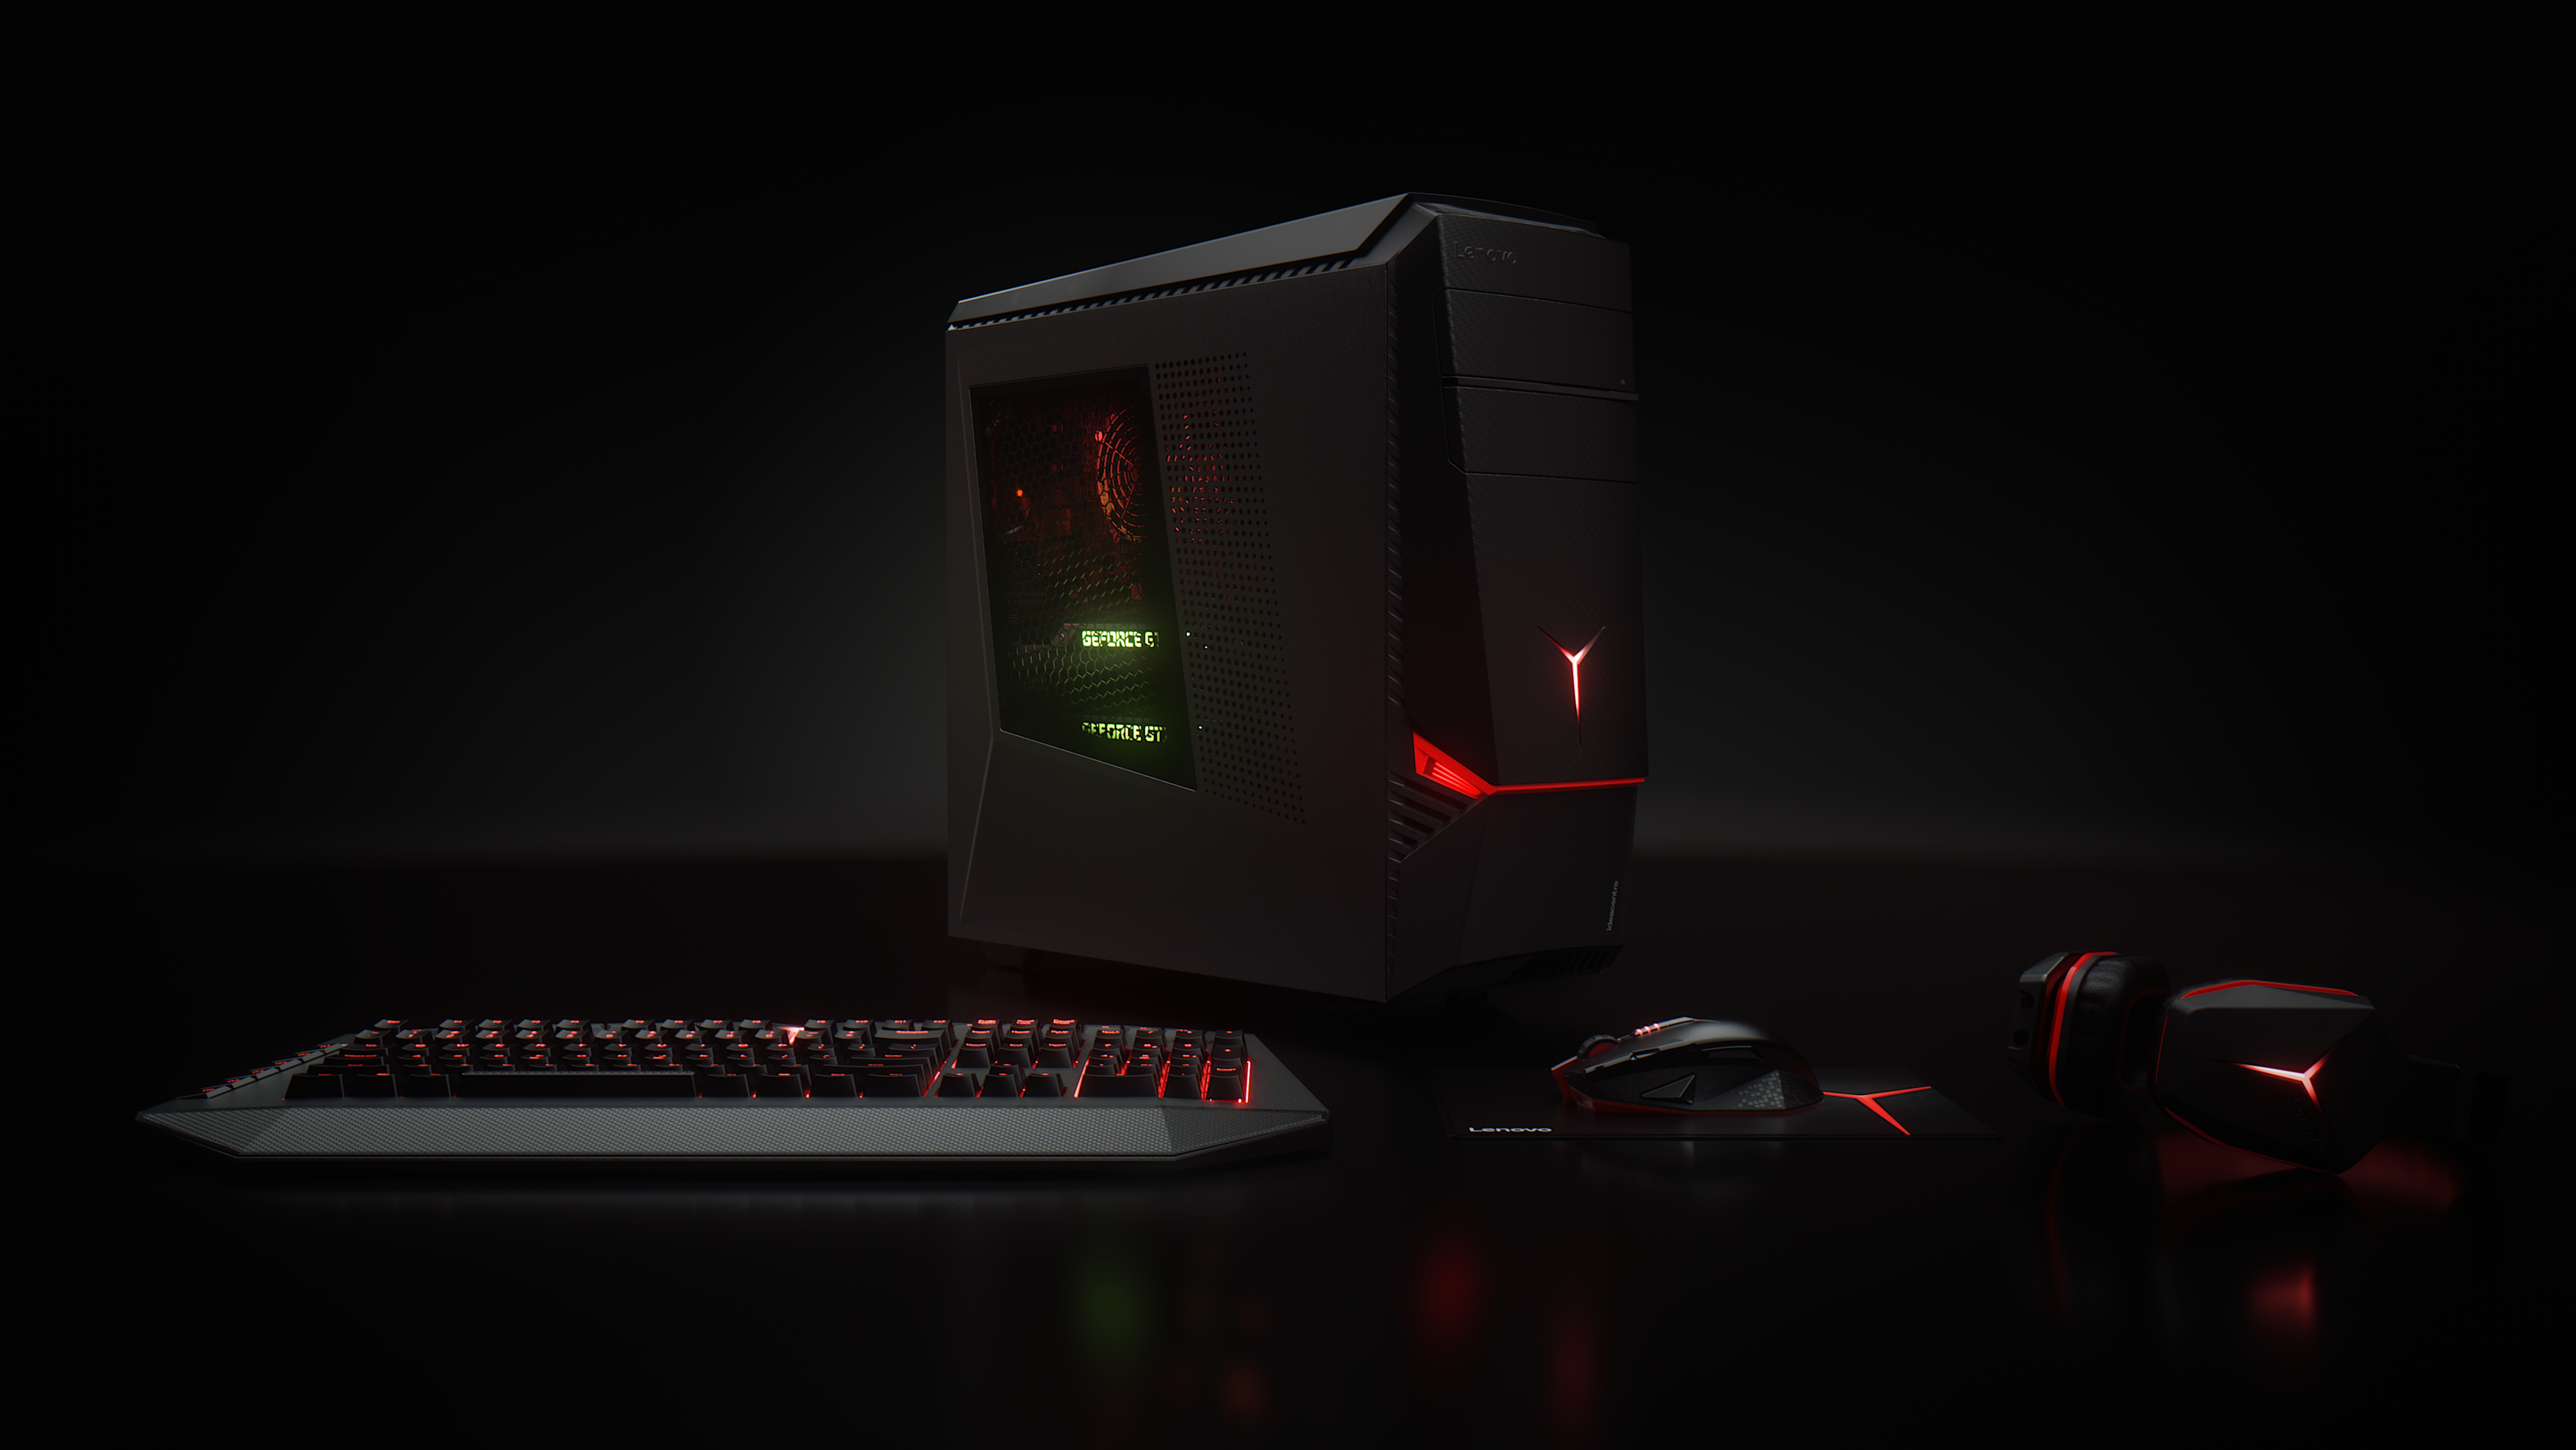 en lille Dominerende Interpretive Lenovo Announces New Devices for PC Gamers and Business Professionals |  Windows Experience Blog